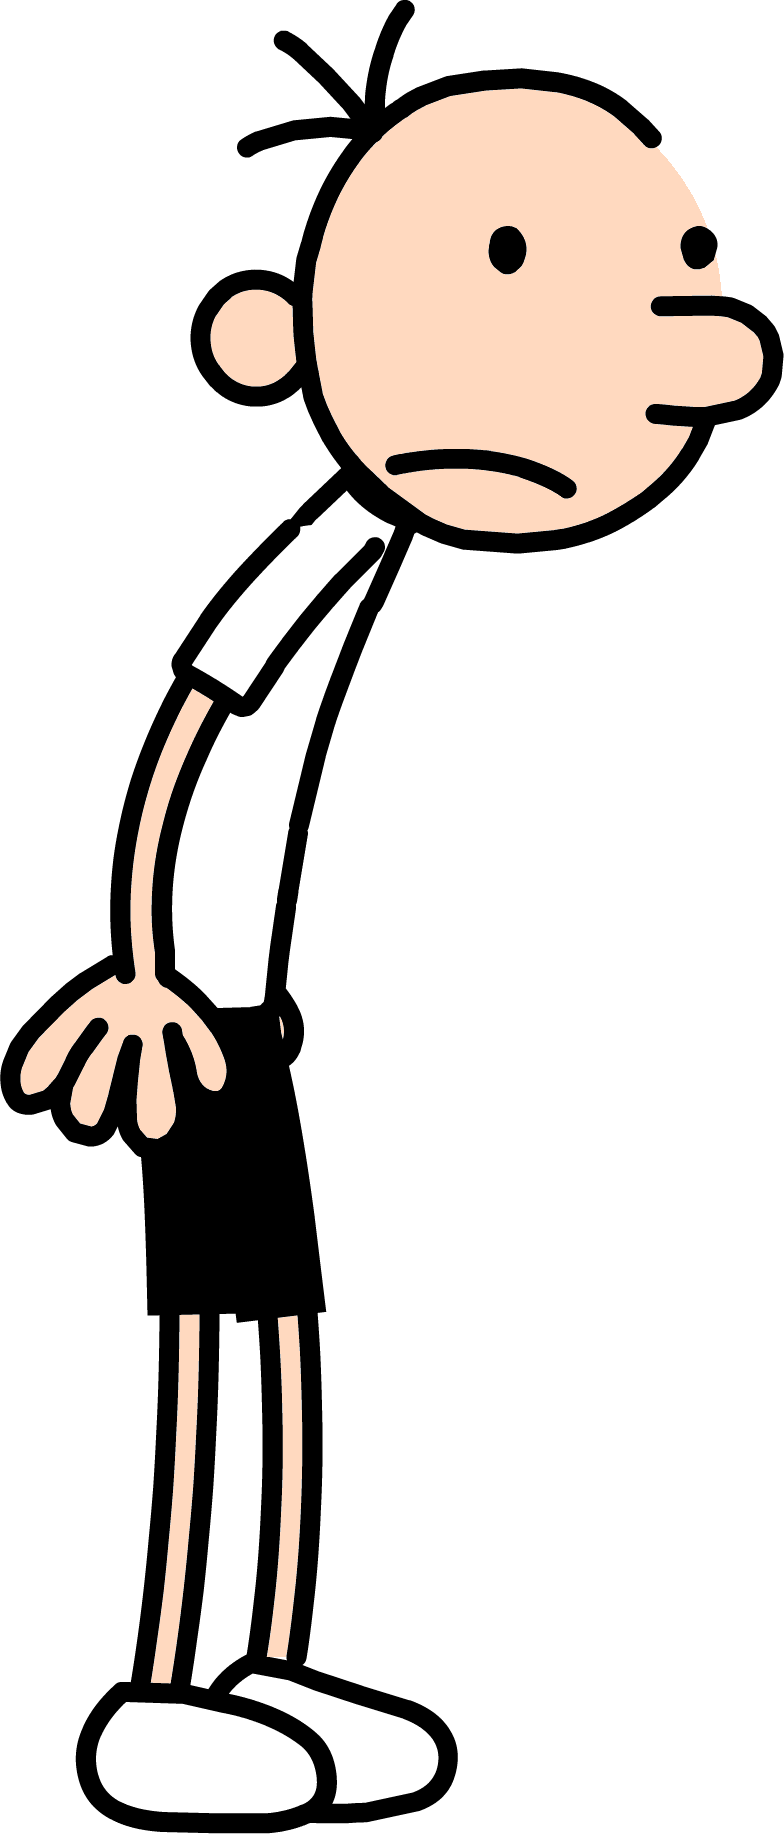 image-greg-png-diary-of-a-wimpy-kid-wiki